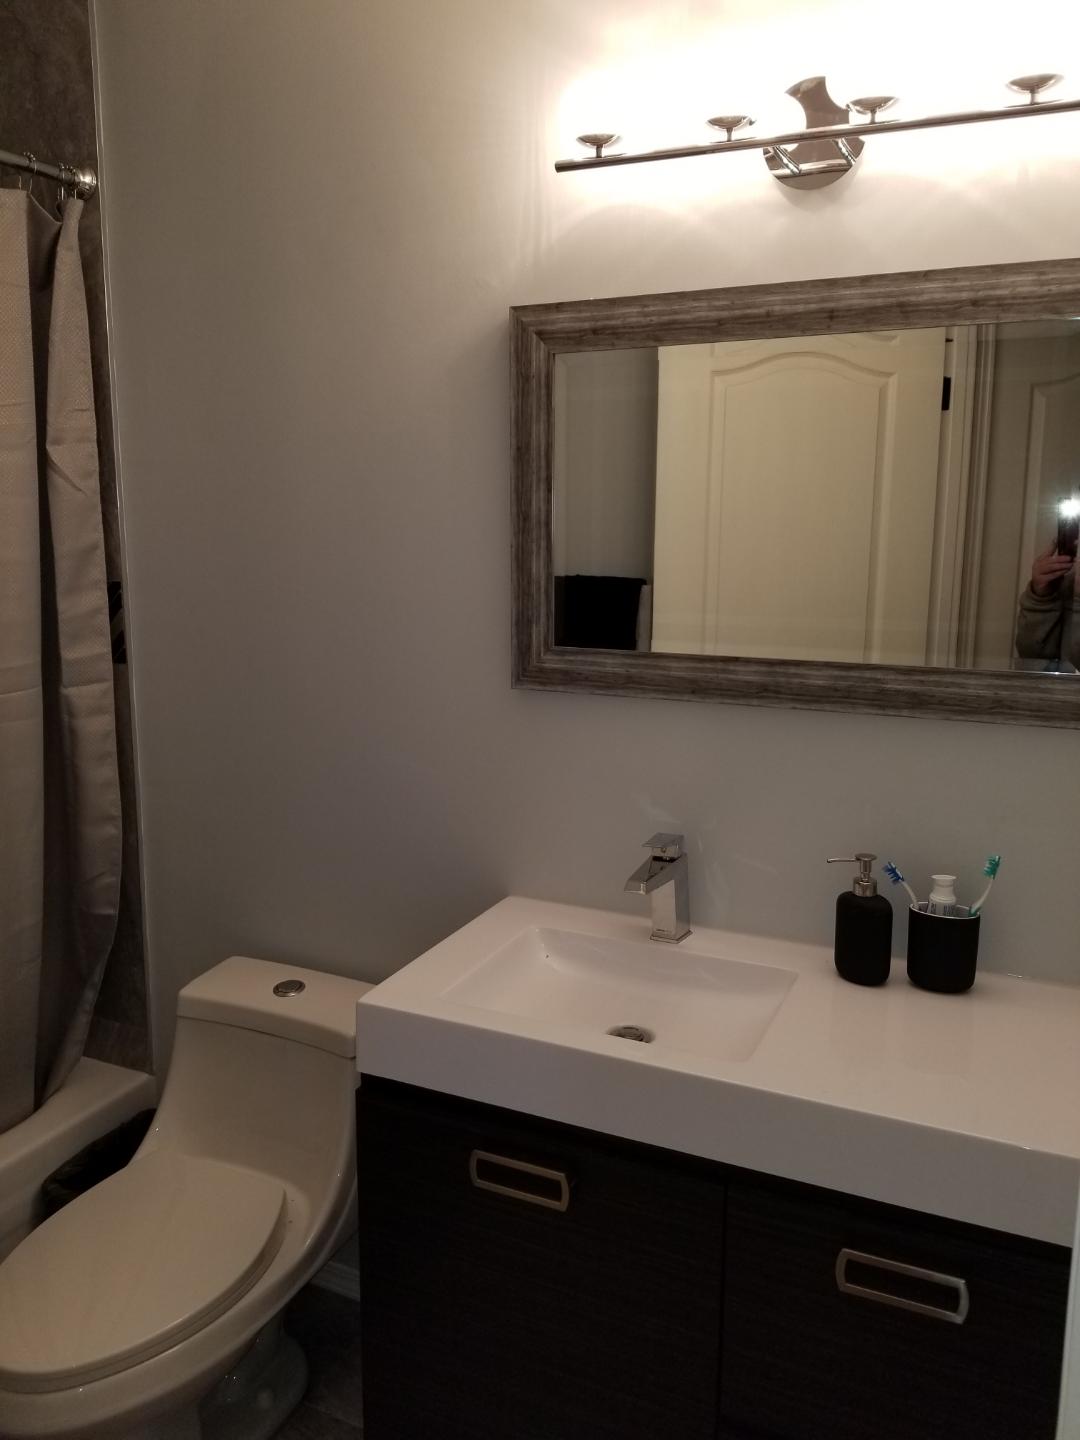 A wide mirror and a modern sink for a bathroom renovation project